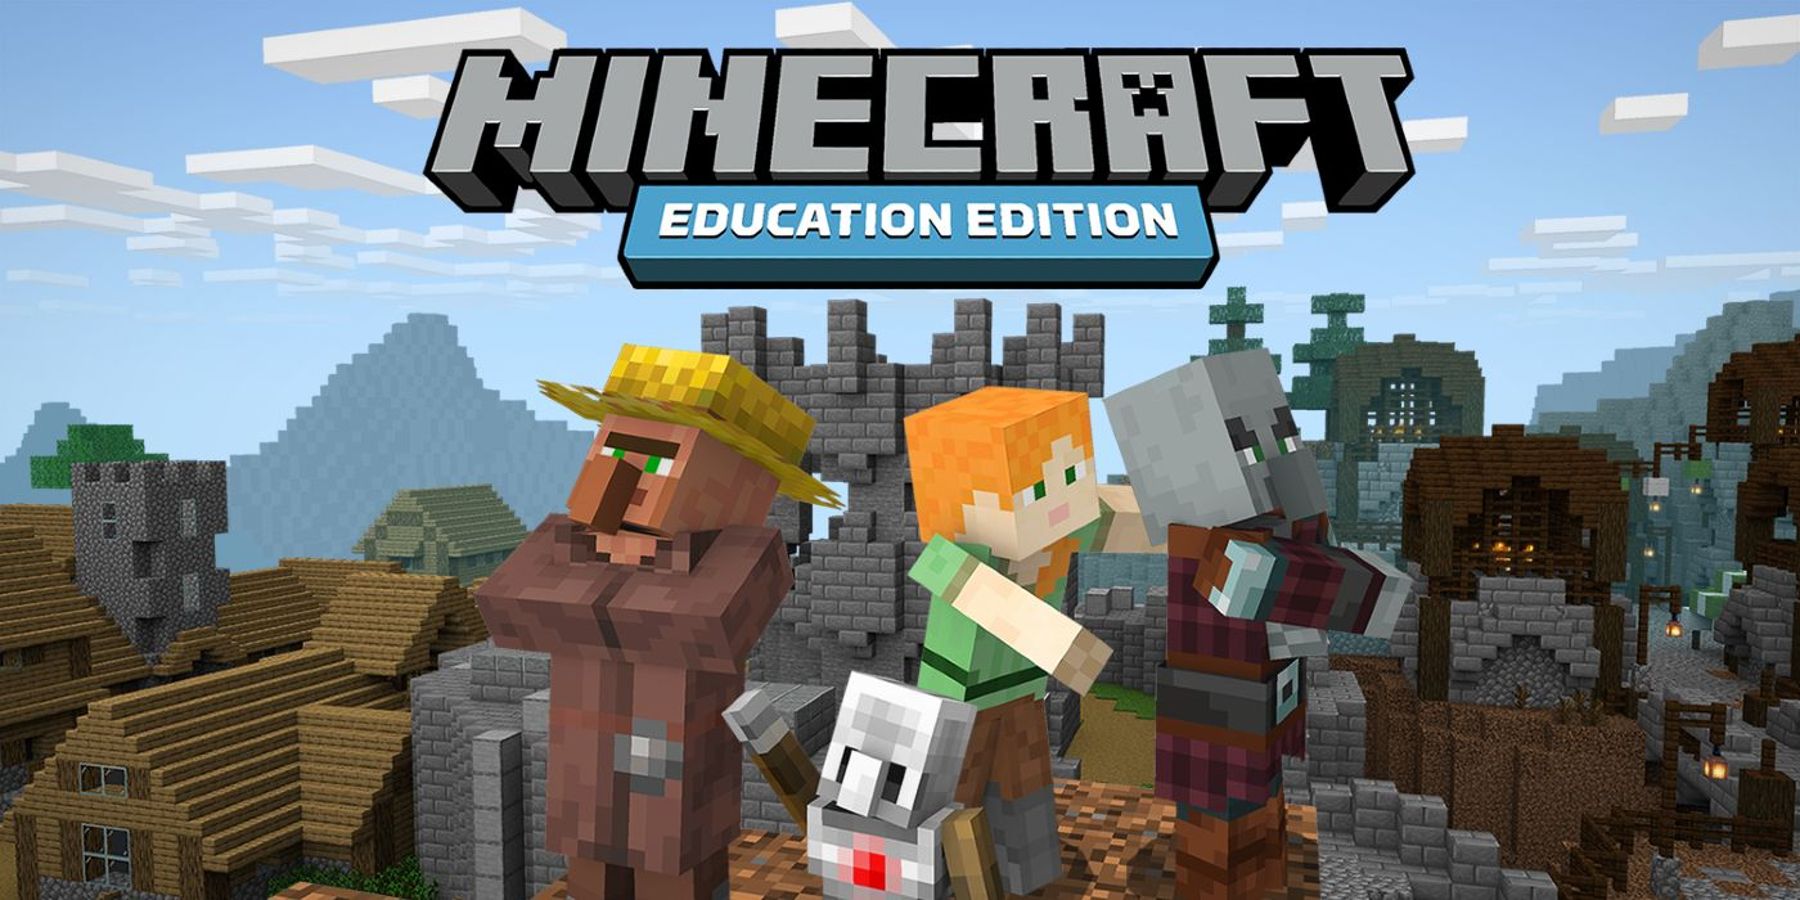 Minecraft Education Edition Features That Should Appear in Other Versions